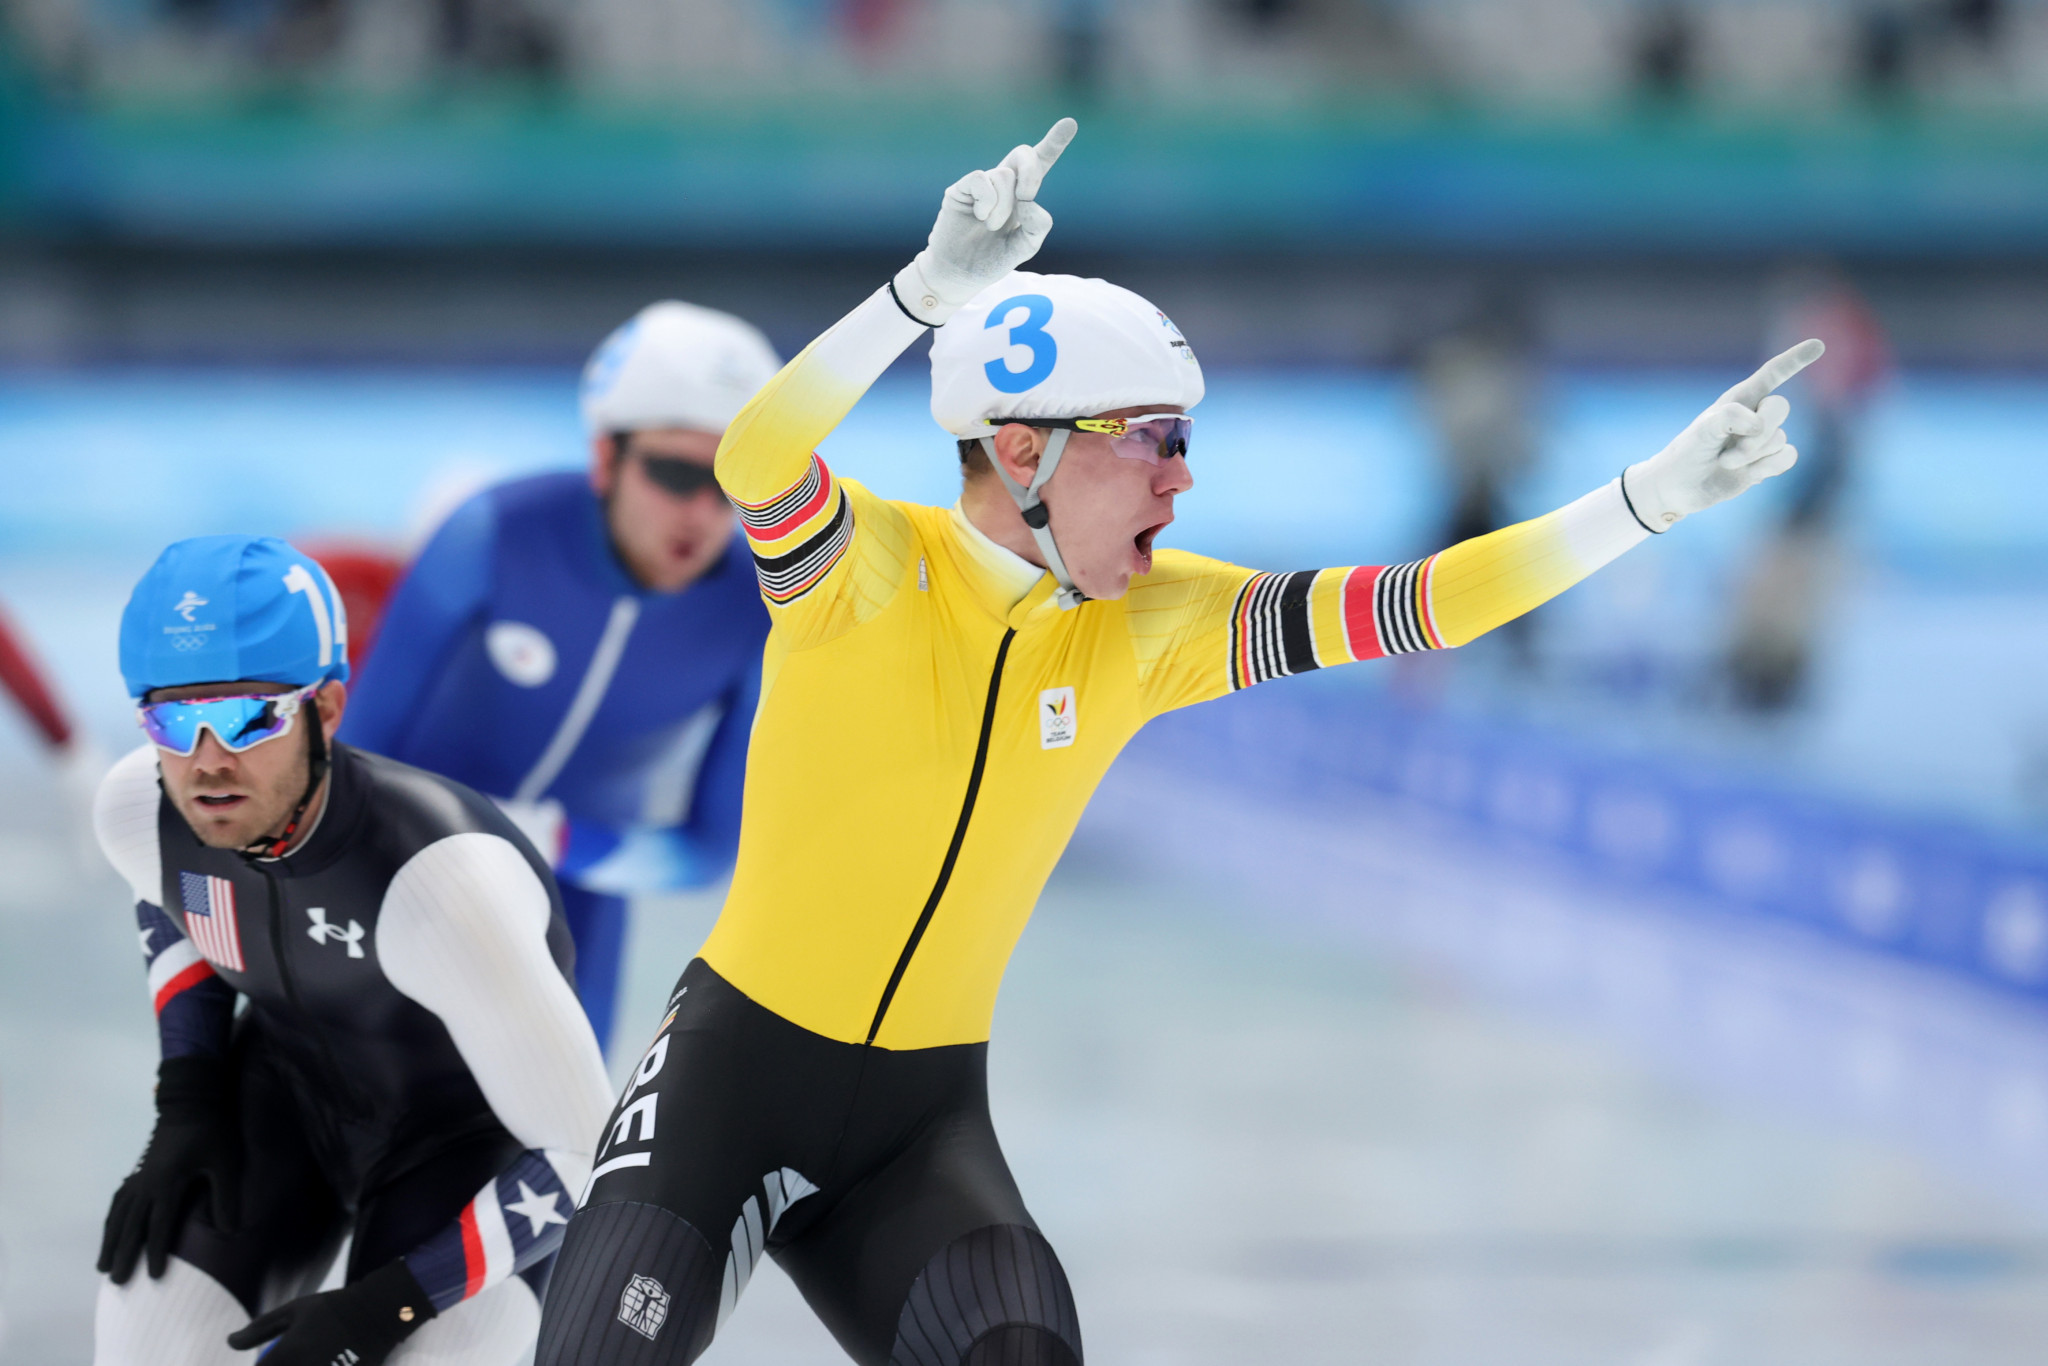 Bart Swings became the first Belgian to win Winter Olympic gold in 74 years after his victory in the men's mass start ©Getty Images